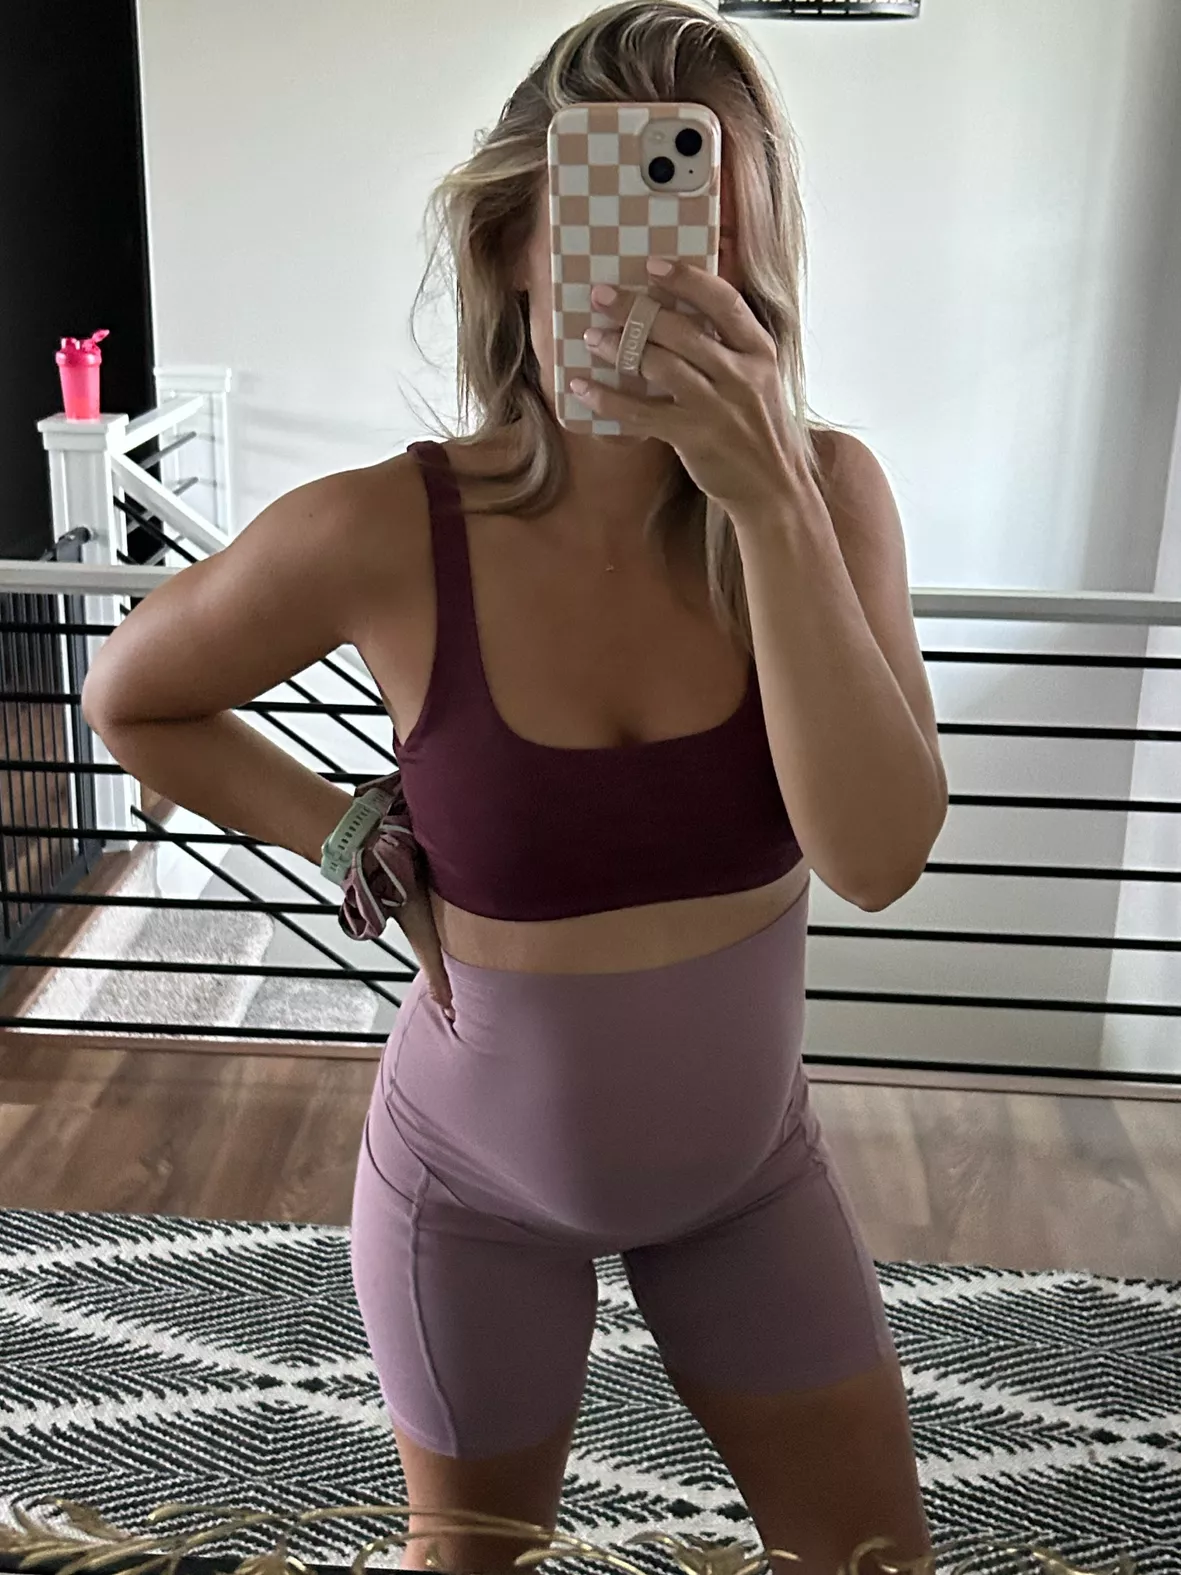 Managed to get the align jogger in violet verbena when it was